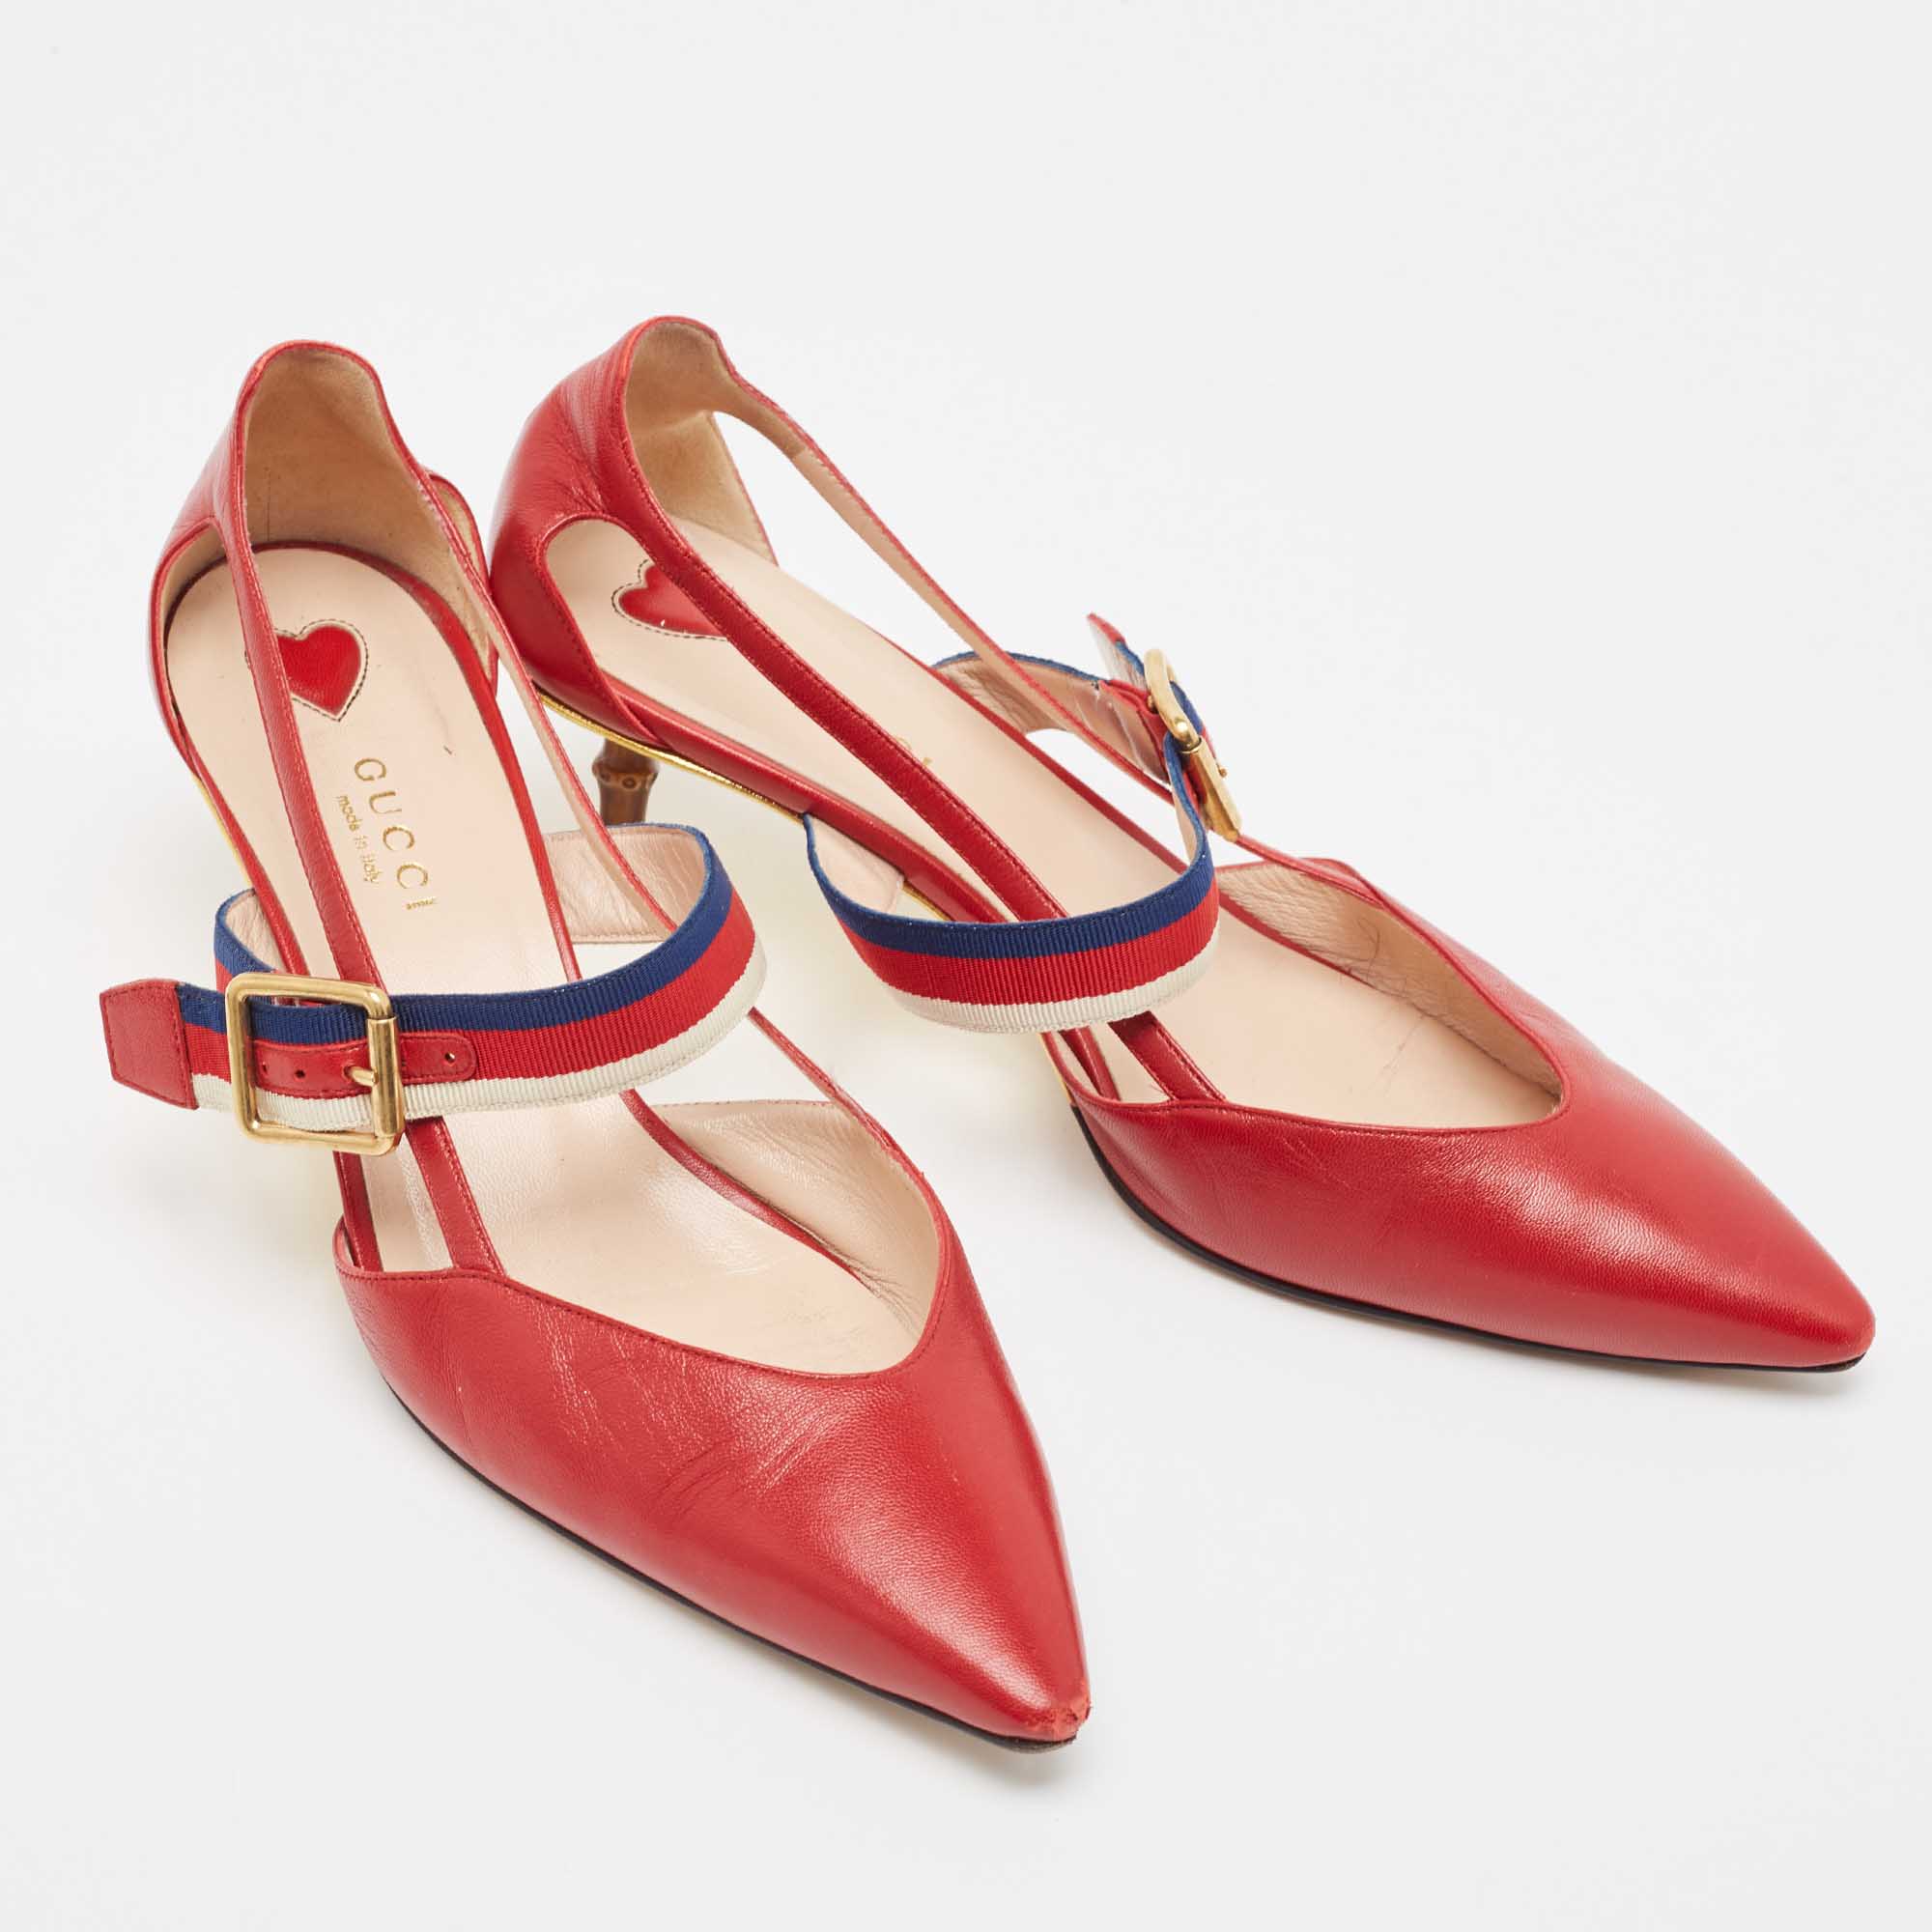 Gucci Red Leather Sylvie Buckle Pointed Toe Pumps Size 38